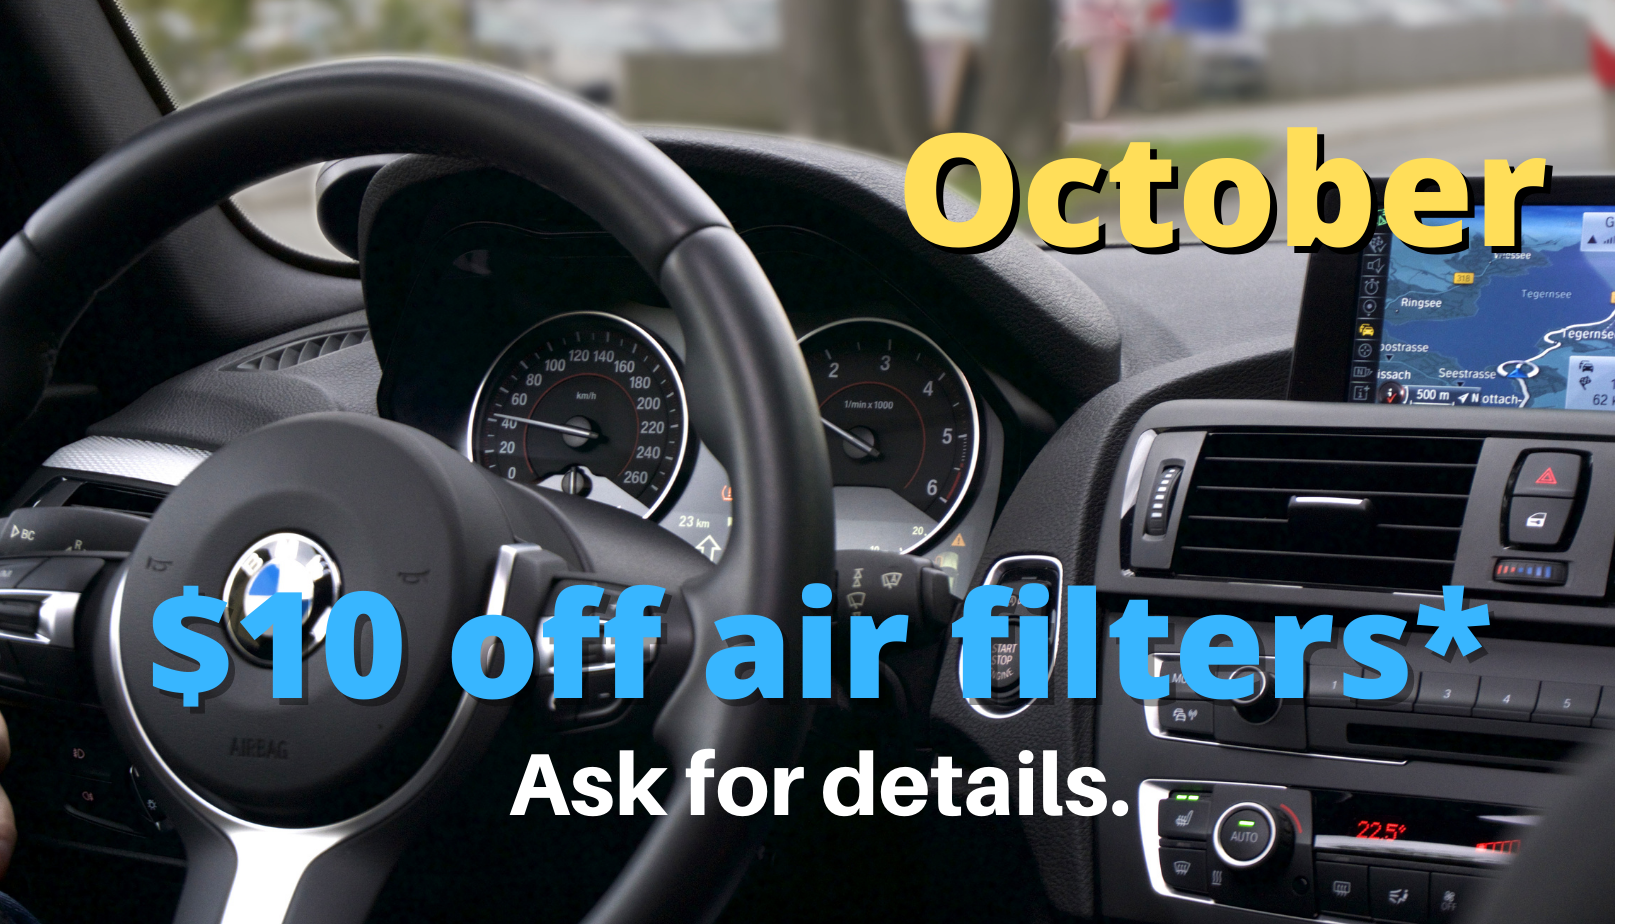 Purchase a Full Synthetic, Semi Synthetic, or High Mileage oil change service in October & receive $10 off air filters* Ask for details.!